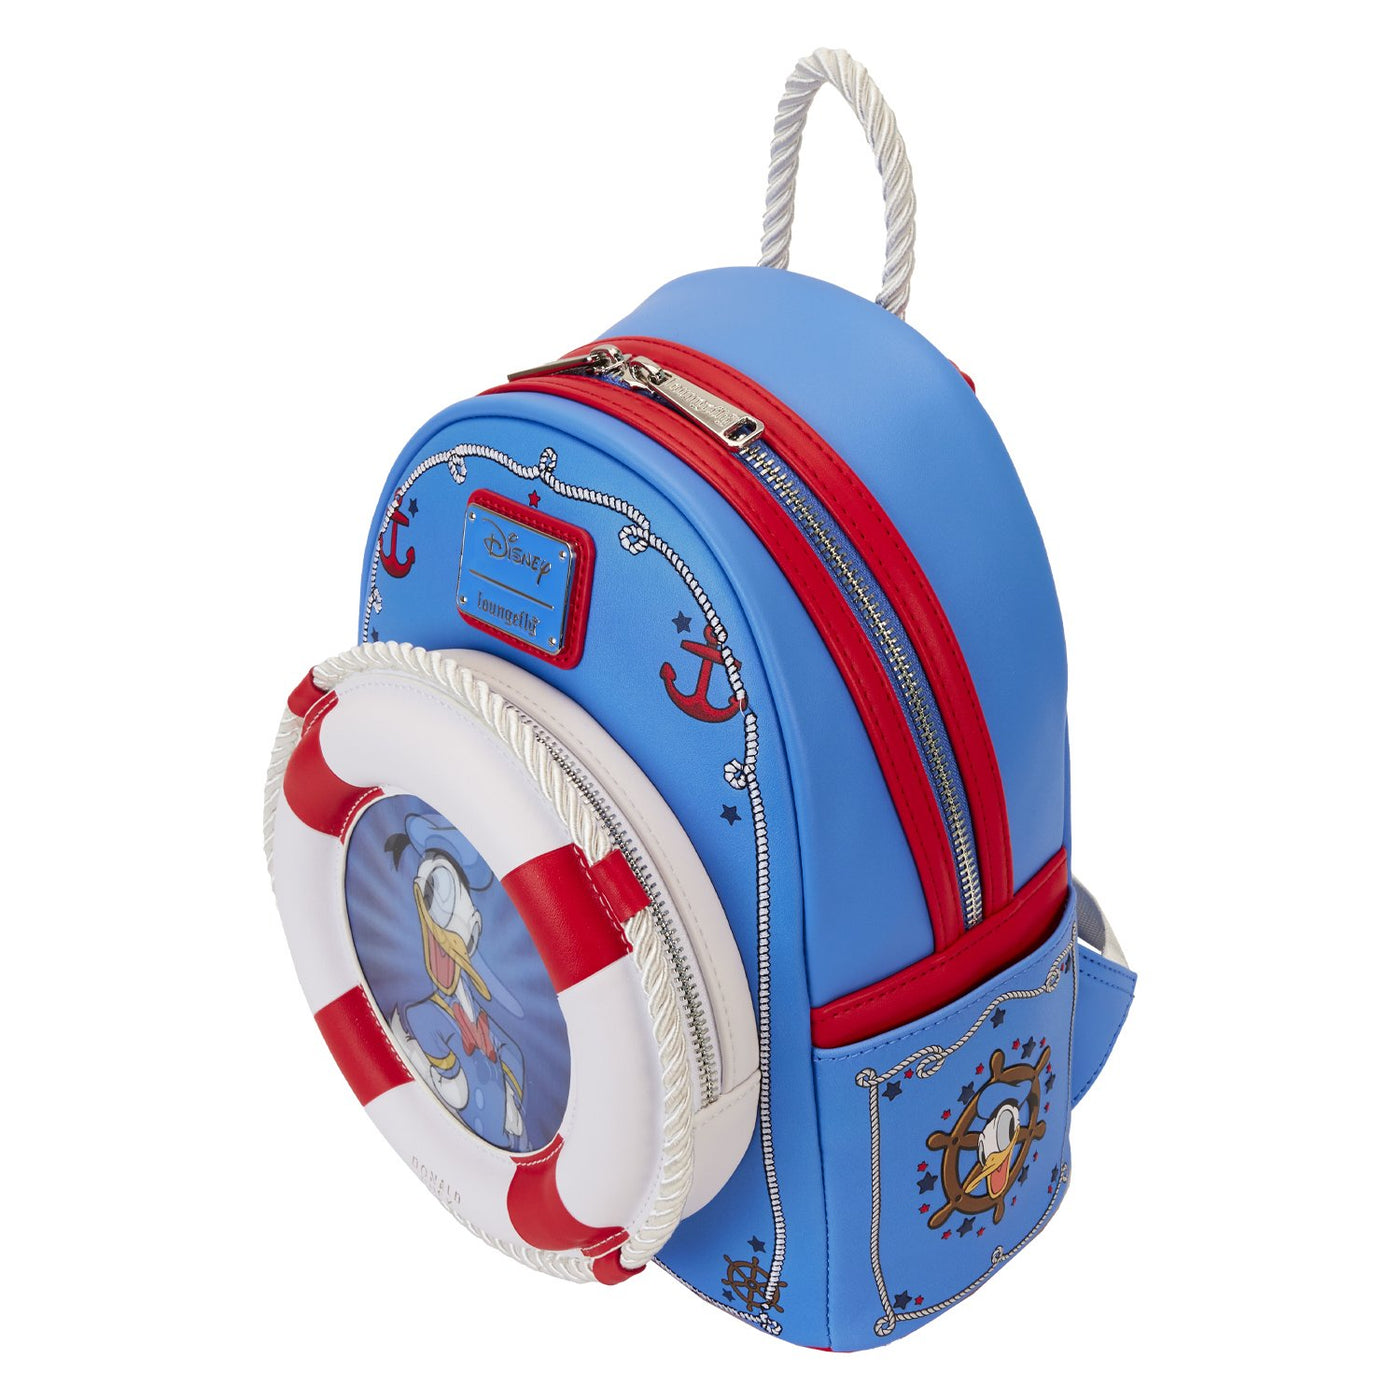 WDBK3642 - Loungefly Disney Donald Duck 90th Anniversary Mini Backpack - Top View